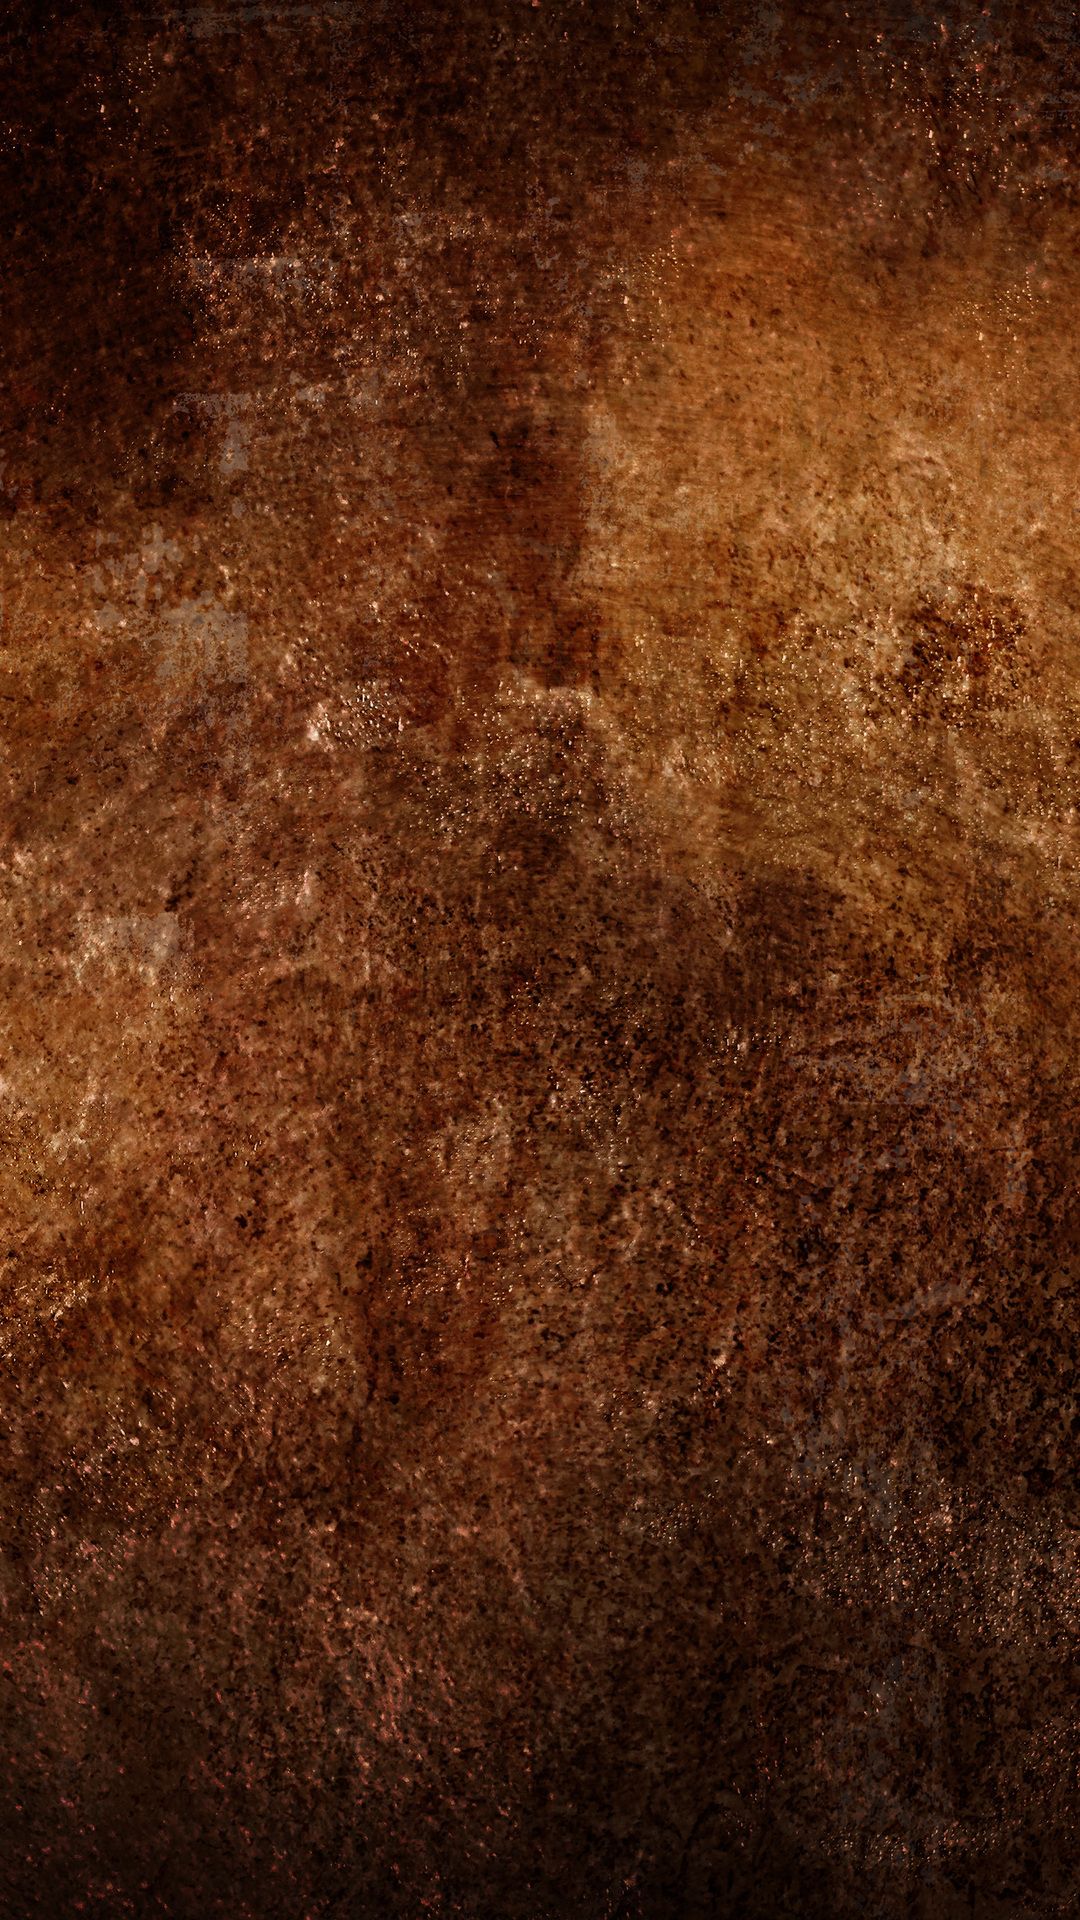 Corrosion, Rust, Iron, Metal Photo - Dark Rusted Metal Texture , HD Wallpaper & Backgrounds